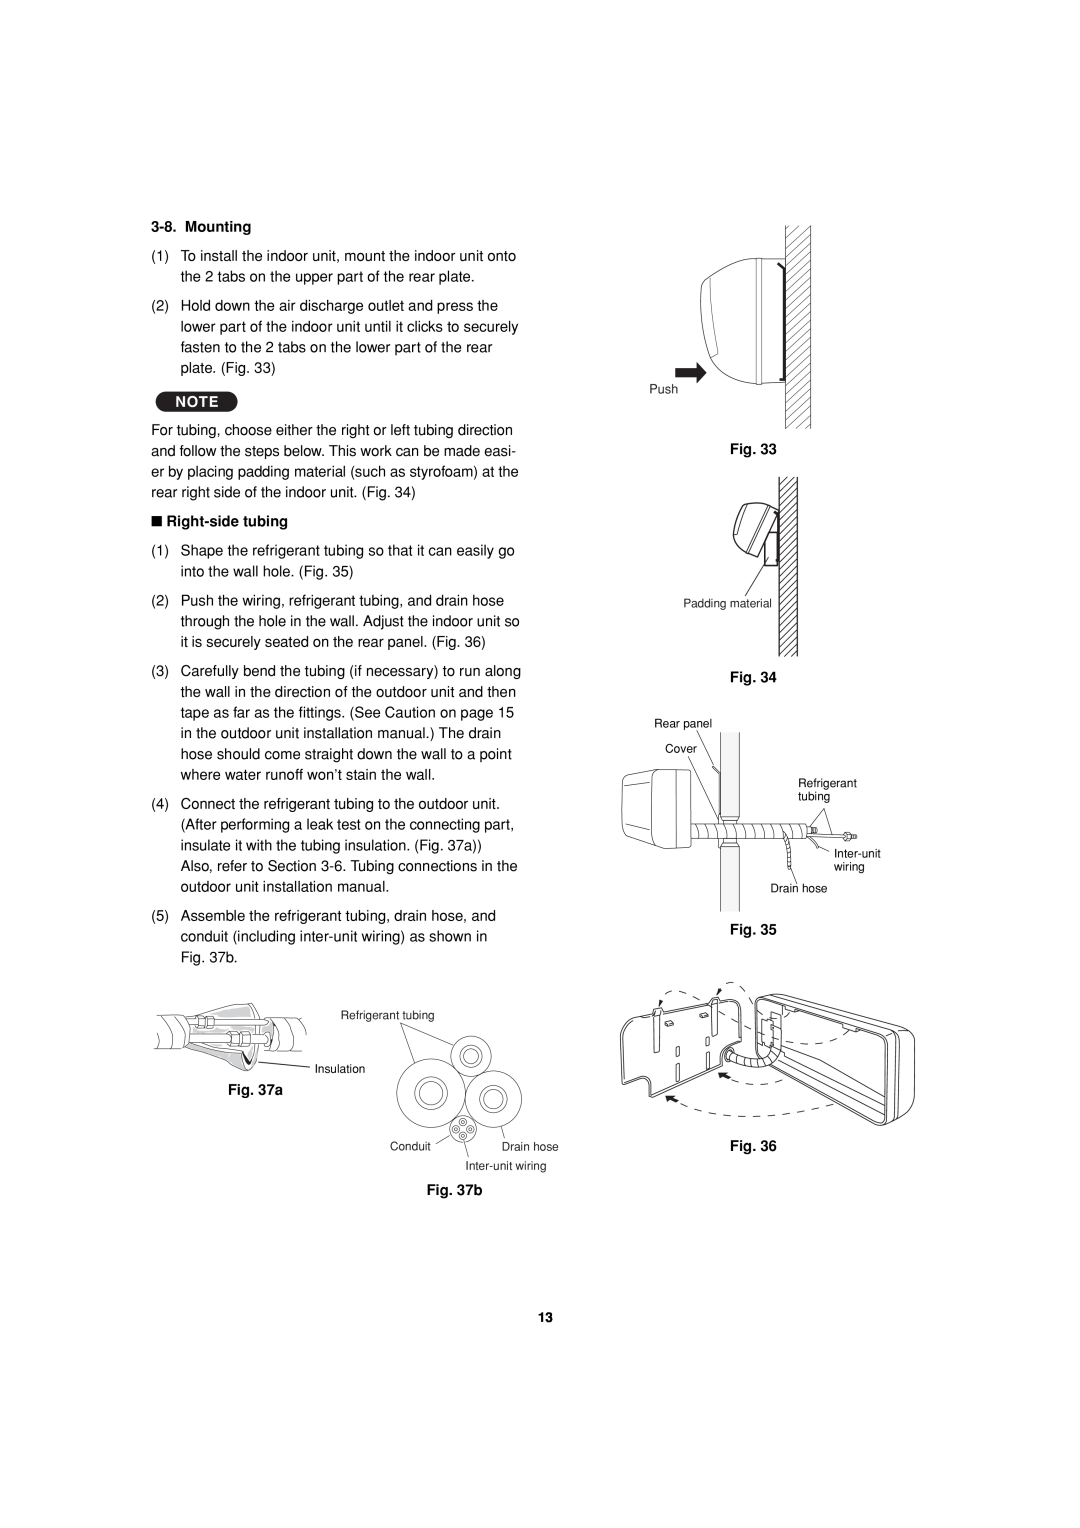 Sanyo KMS2472, KMS1872 service manual Mounting, Right-sidetubing, Fig. Fig, Push 